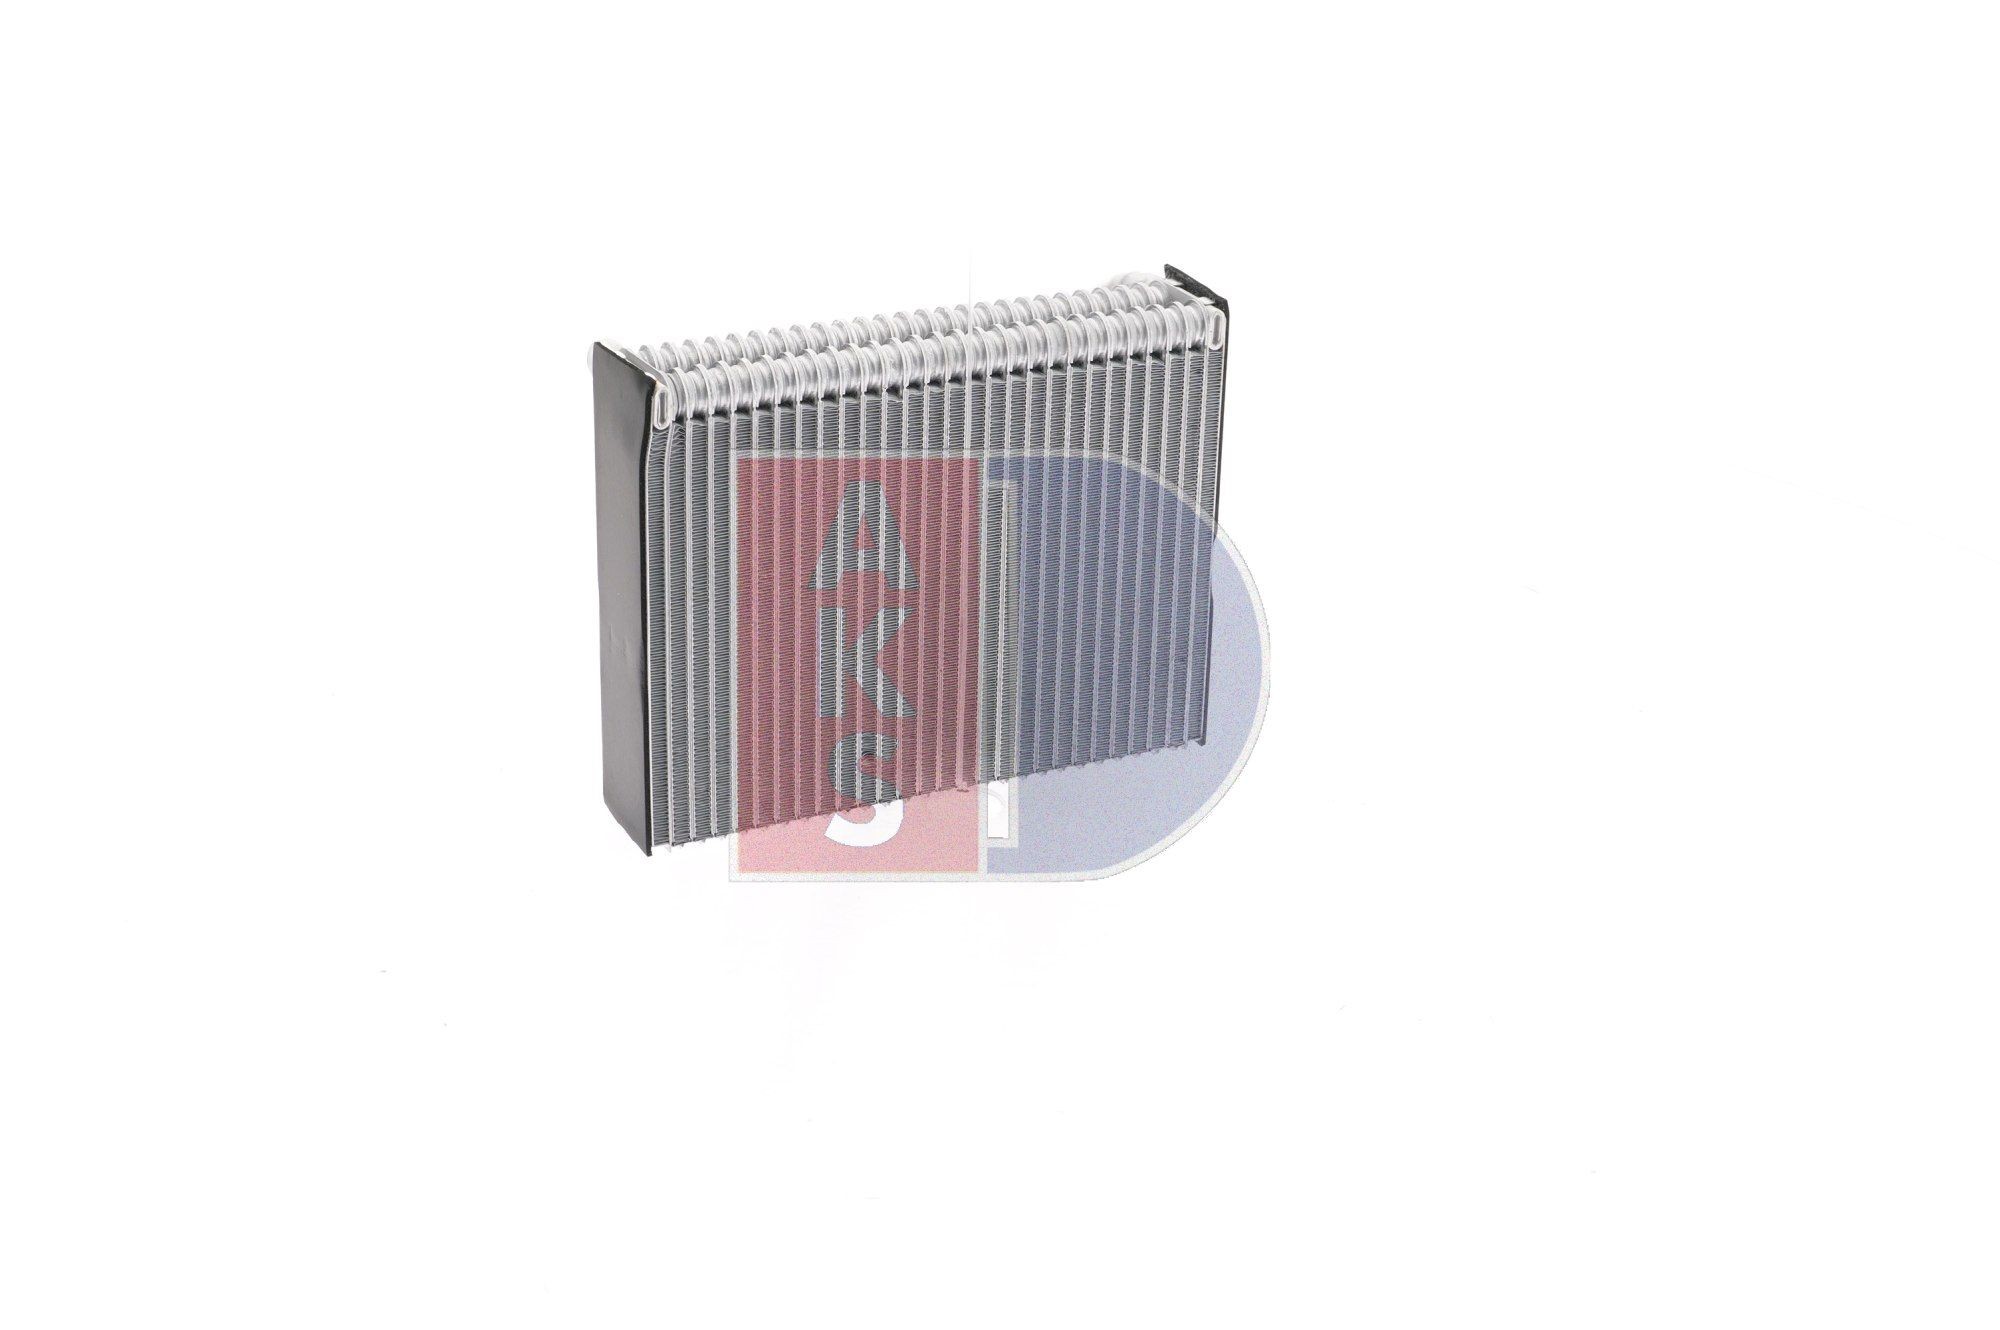 Air conditioning evaporator 821190N from AKS DASIS